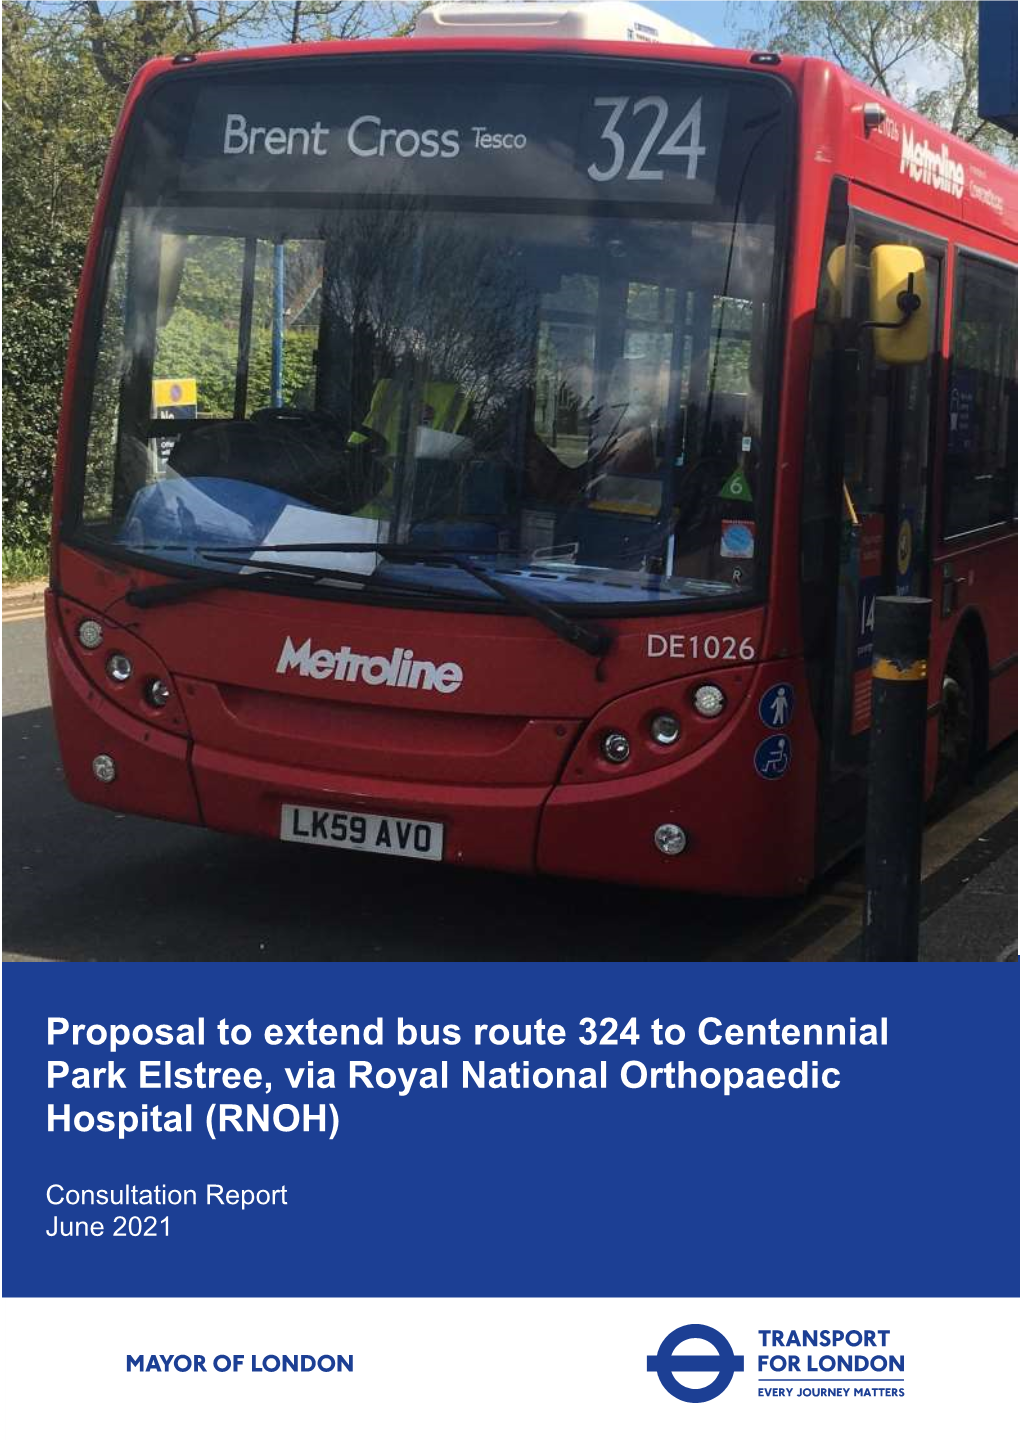 Proposal to Extend Bus Route 324 Consultation Report